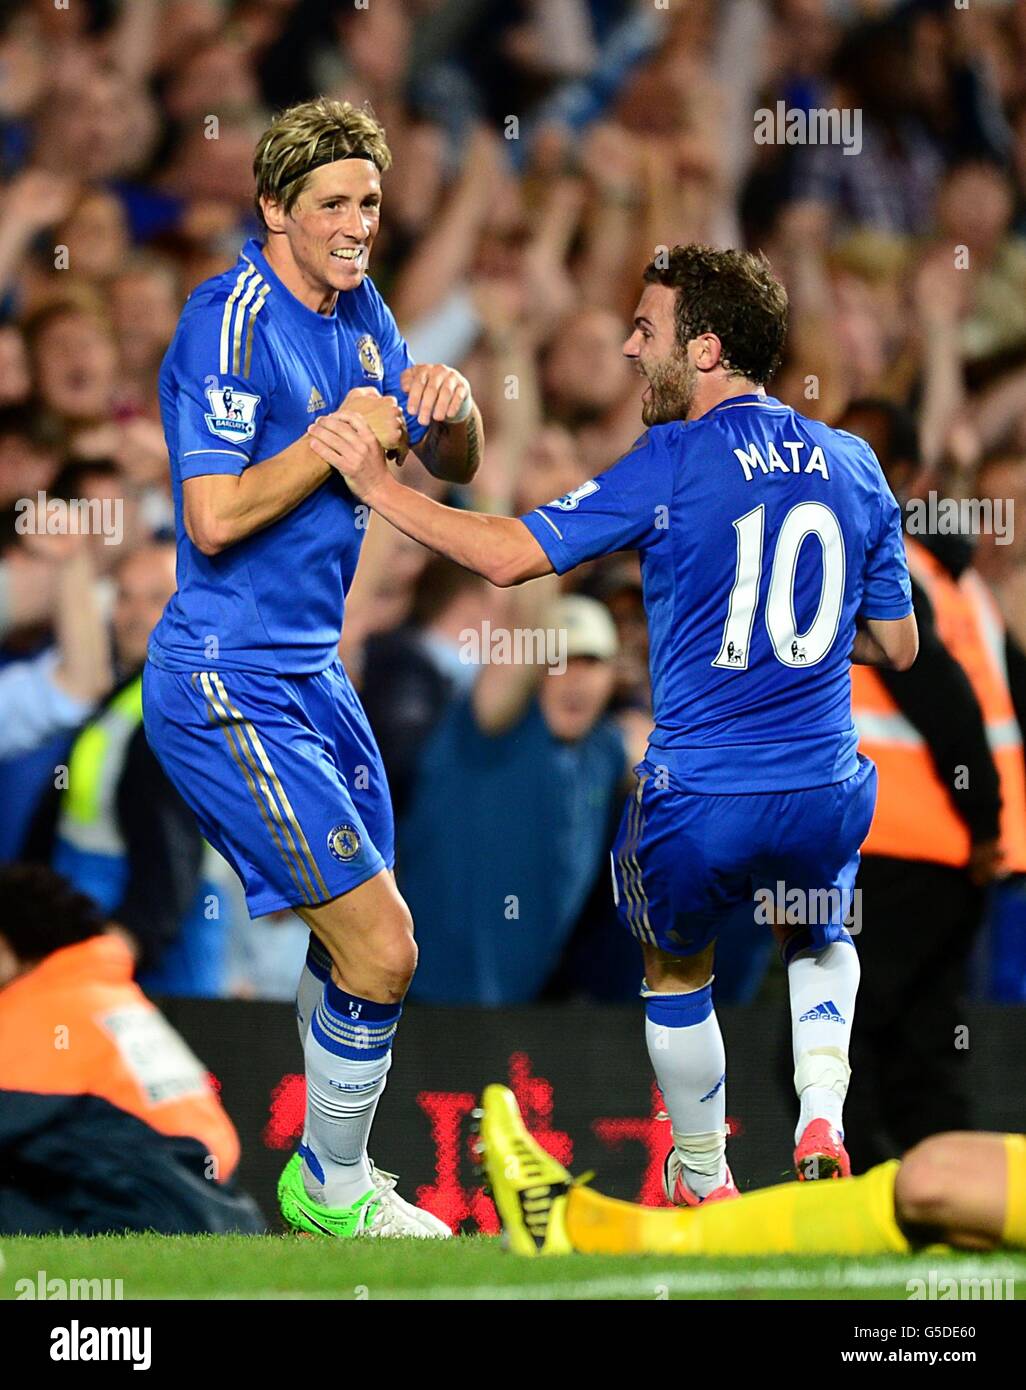 Soccer - Barclays Premier League - Chelsea v Reading - Stamford Bridge. Chelsea's Fernando Torres (left) celebrates with team-mate Juan Mata after scoring his side's third goal of the game Stock Photo